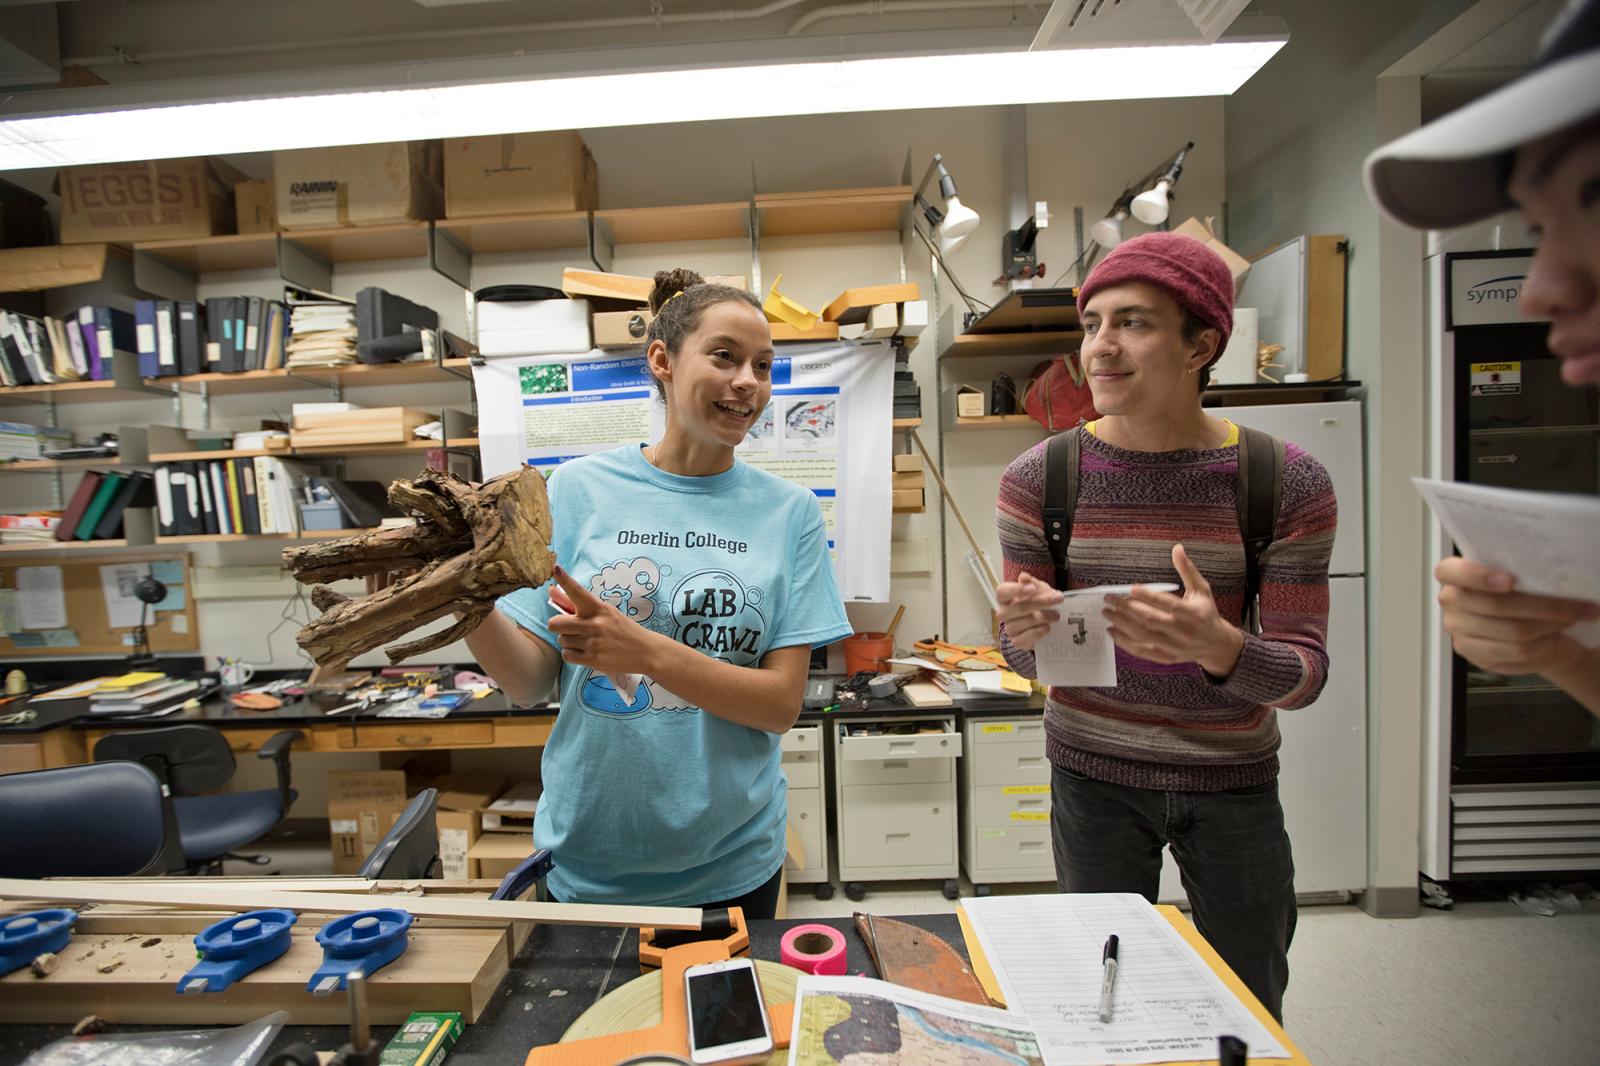 At a lab table a student in a 'Lab Crawl' t-shirt holds up part of a tree branch or stump.